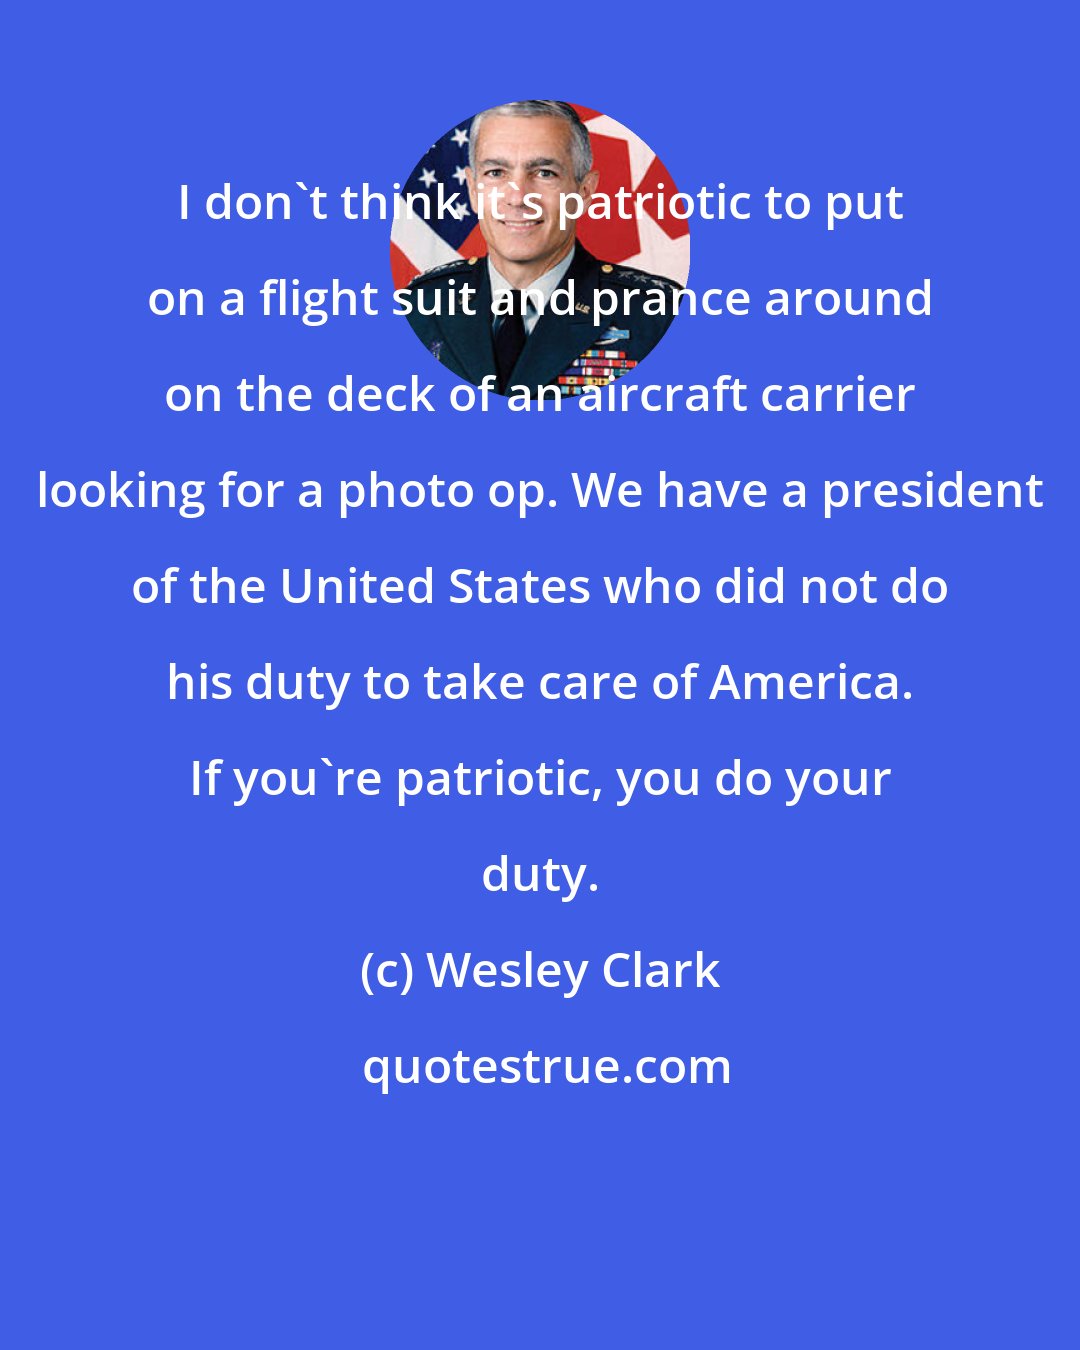 Wesley Clark: I don't think it's patriotic to put on a flight suit and prance around on the deck of an aircraft carrier looking for a photo op. We have a president of the United States who did not do his duty to take care of America. If you're patriotic, you do your duty.